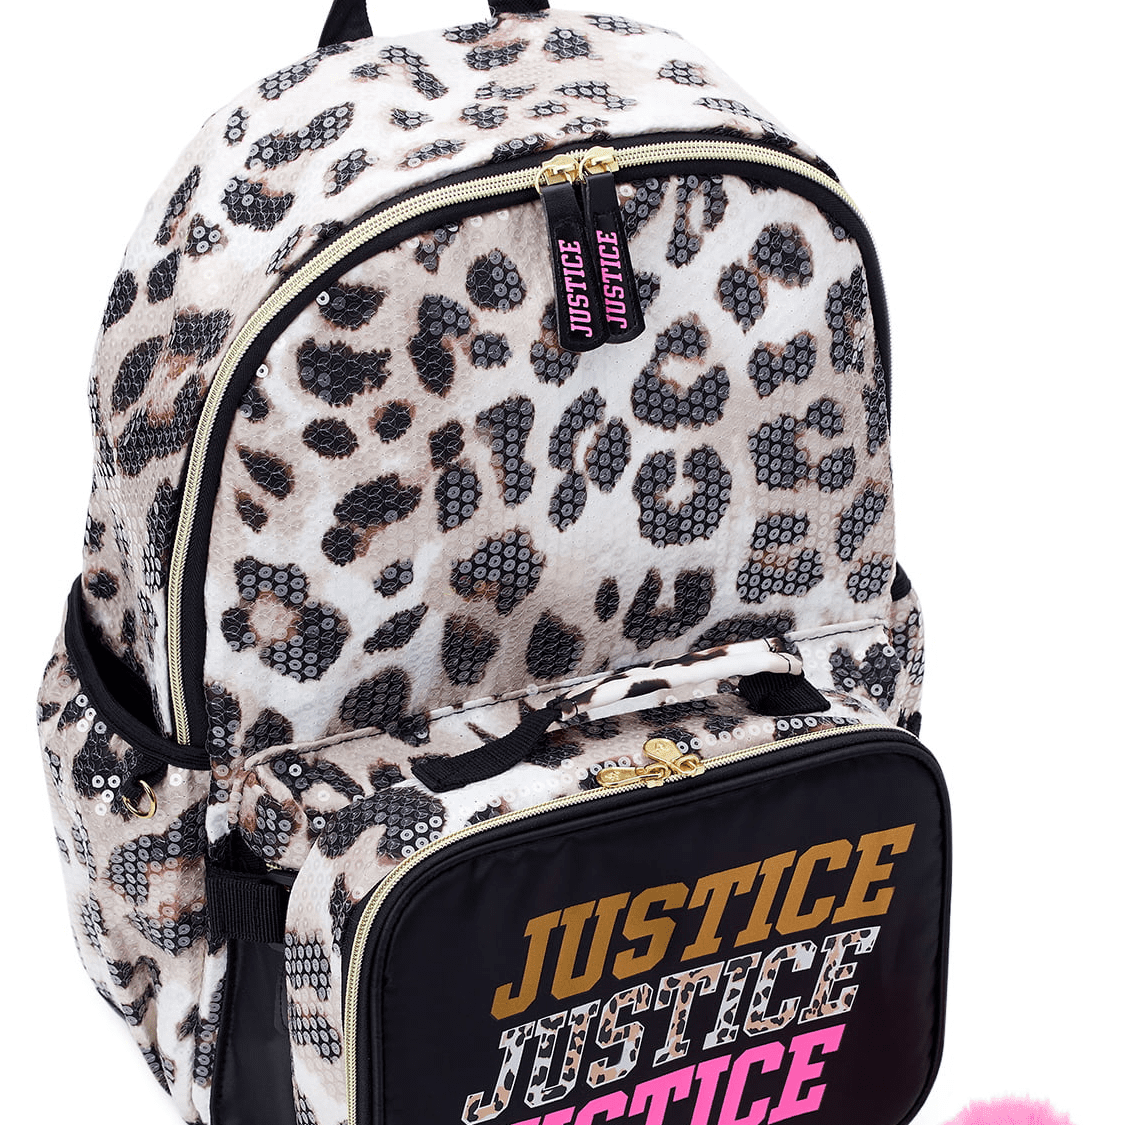 FKELYI 3 Pieces Brown Leopard Animal Cheetah Print School Bags for Kids  Girls Fashion Backpack Adjustable Shoulder Book Bag Set with Lunch Box  Pencil